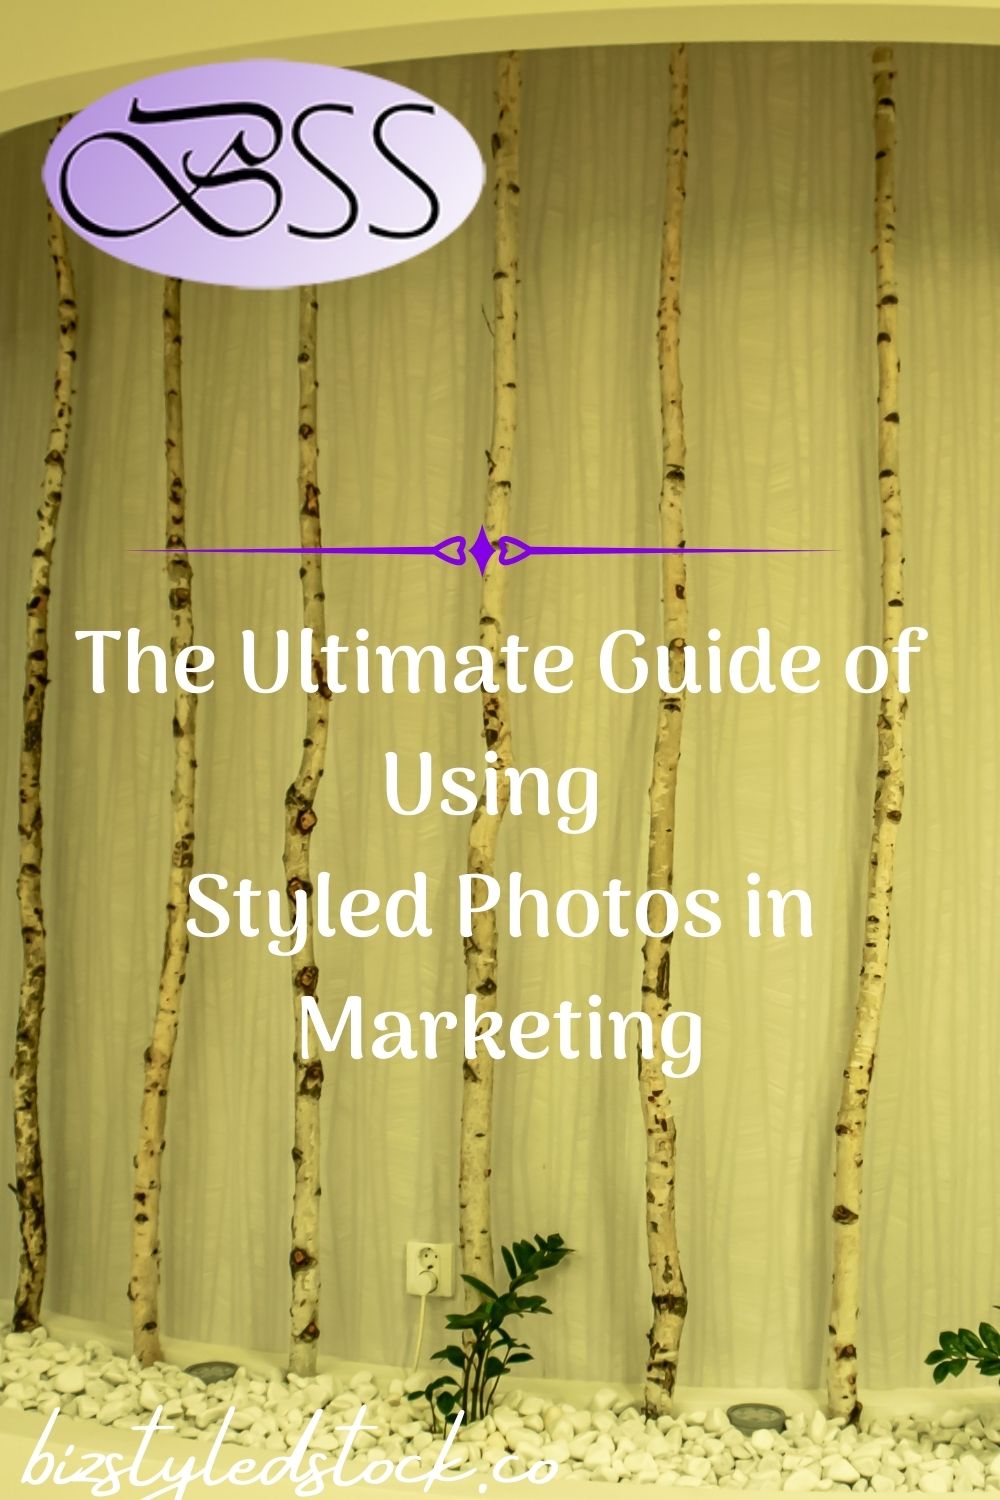 The Ultimate Guide of Using Business Stock Images in Marketing #styledstock images #businessstockimages